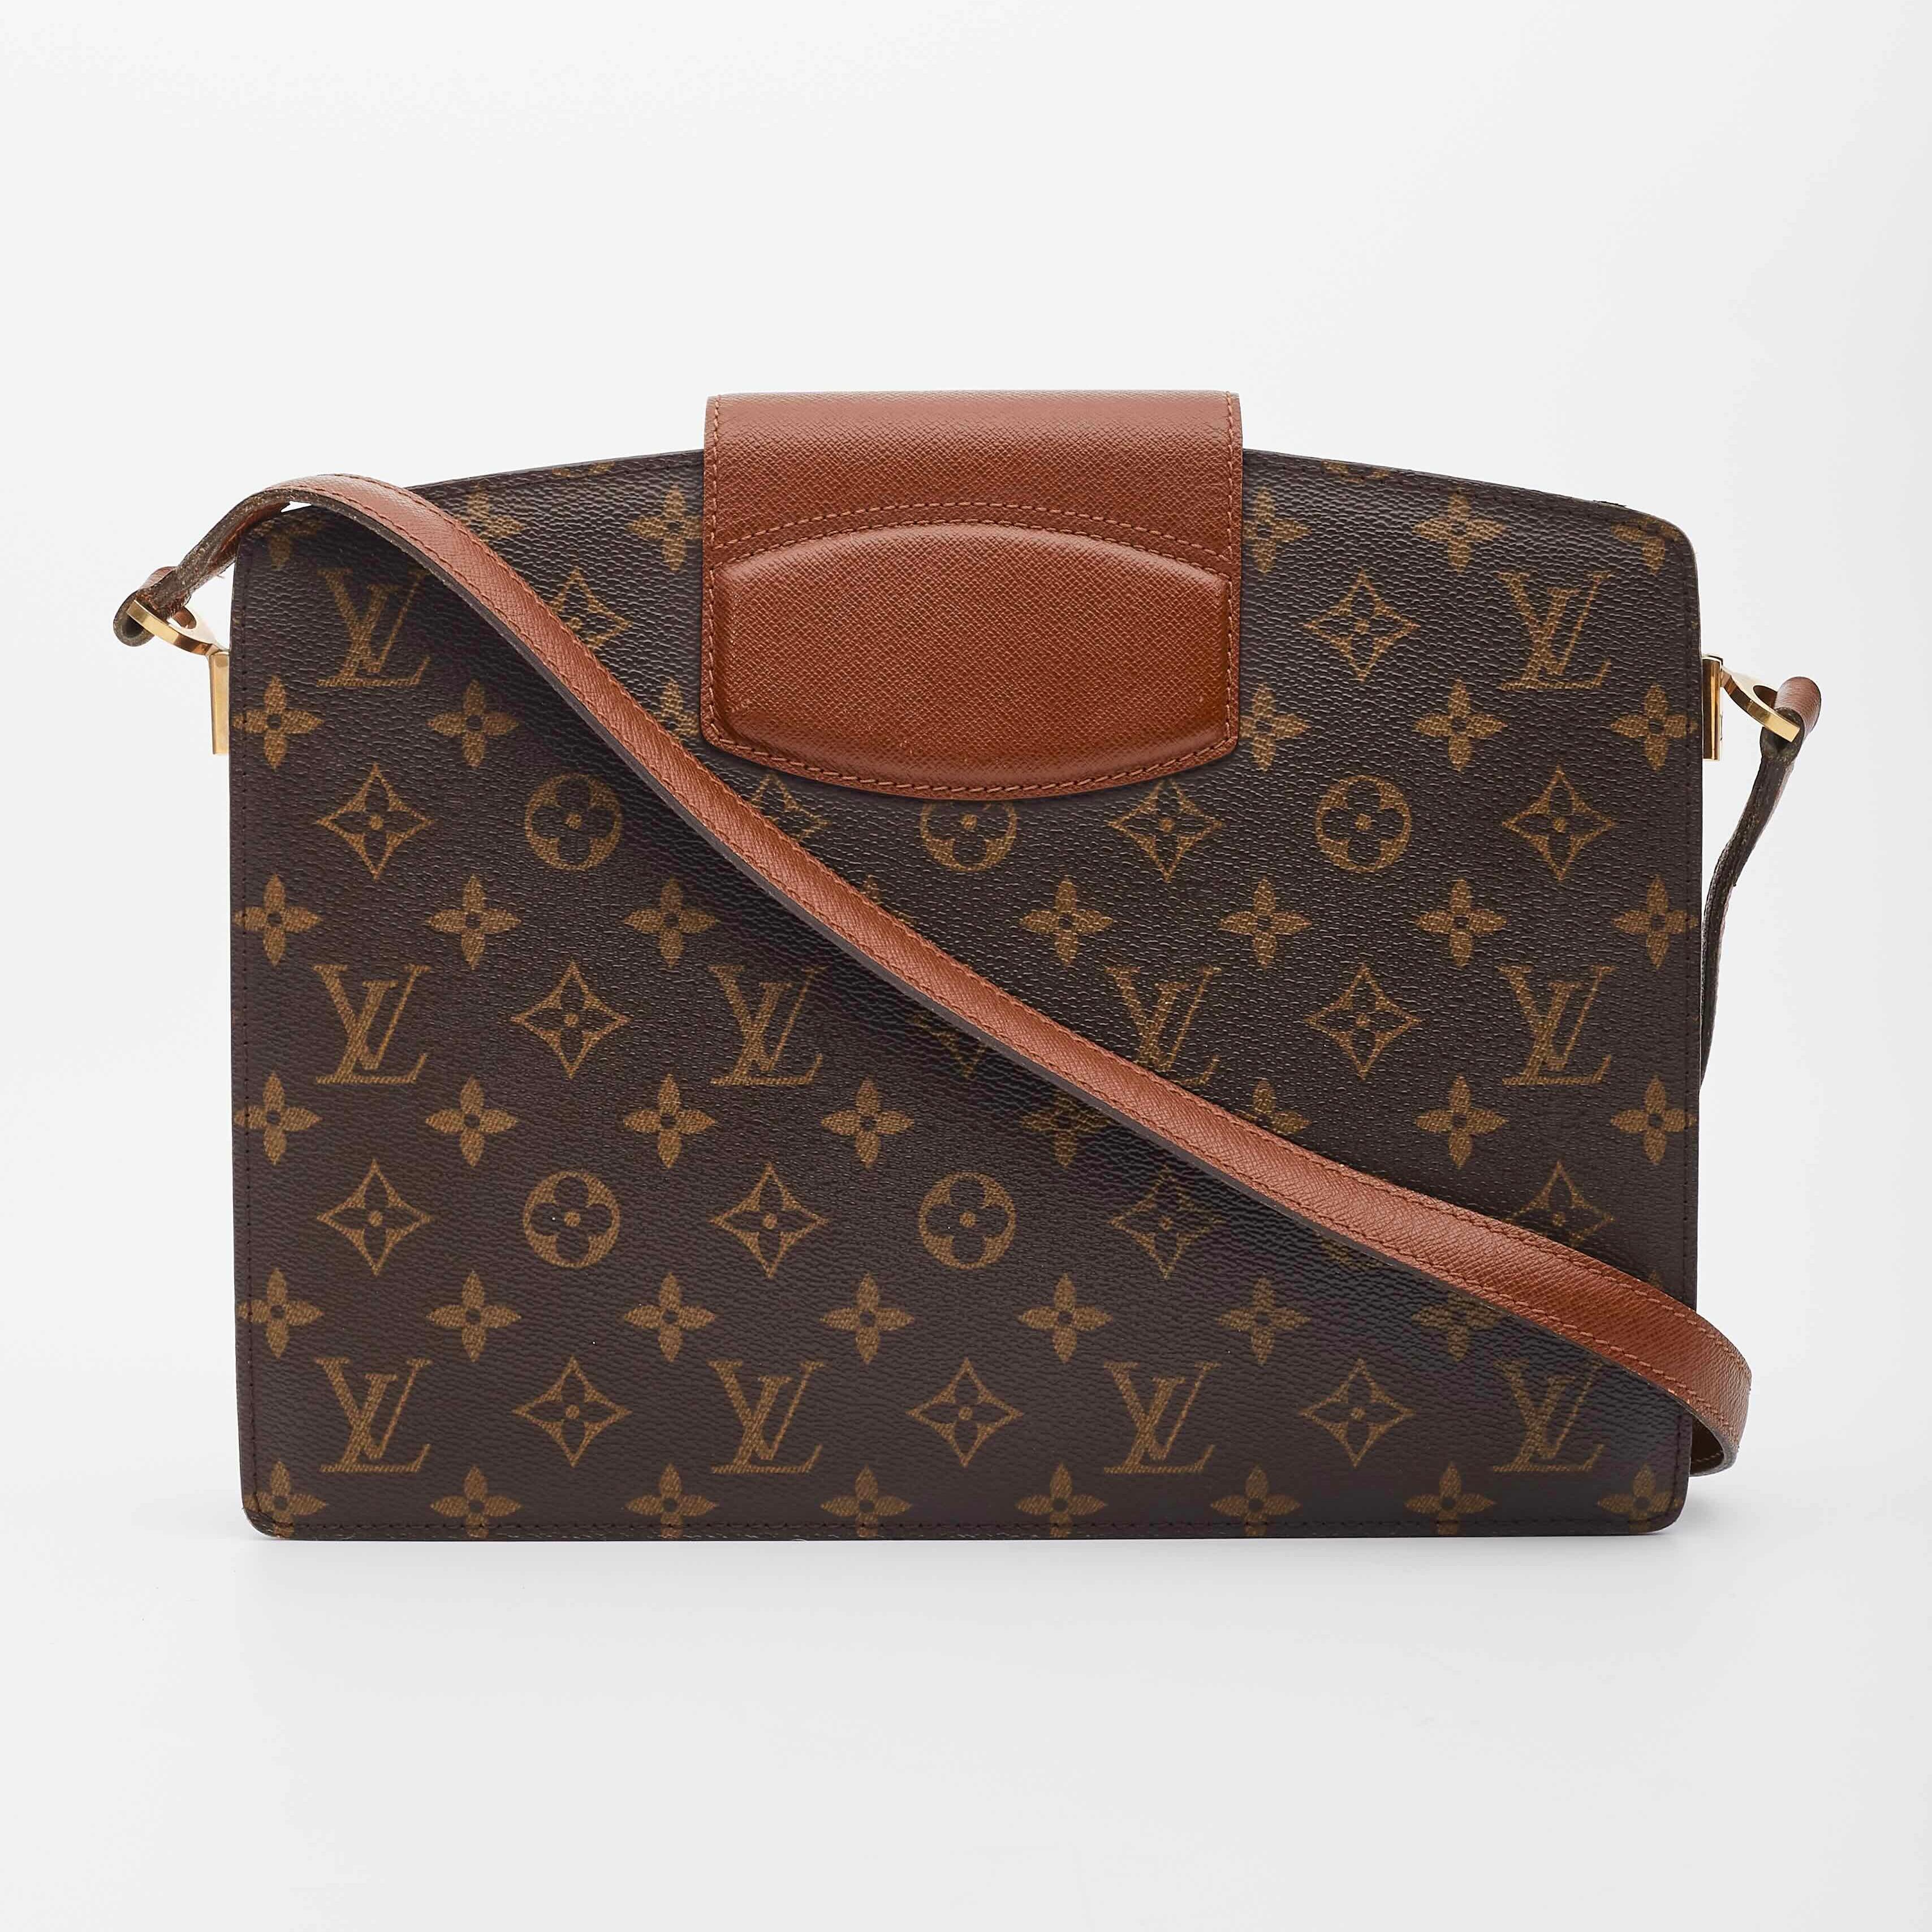 This vintage shoulder bag is made of Louis Vuitton monogram on toile canvas. The bag features a leather cross-grain cross-body shoulder strap and a cross over leather flap that secures with a strap. This opens to a partitioned cross-grain leather